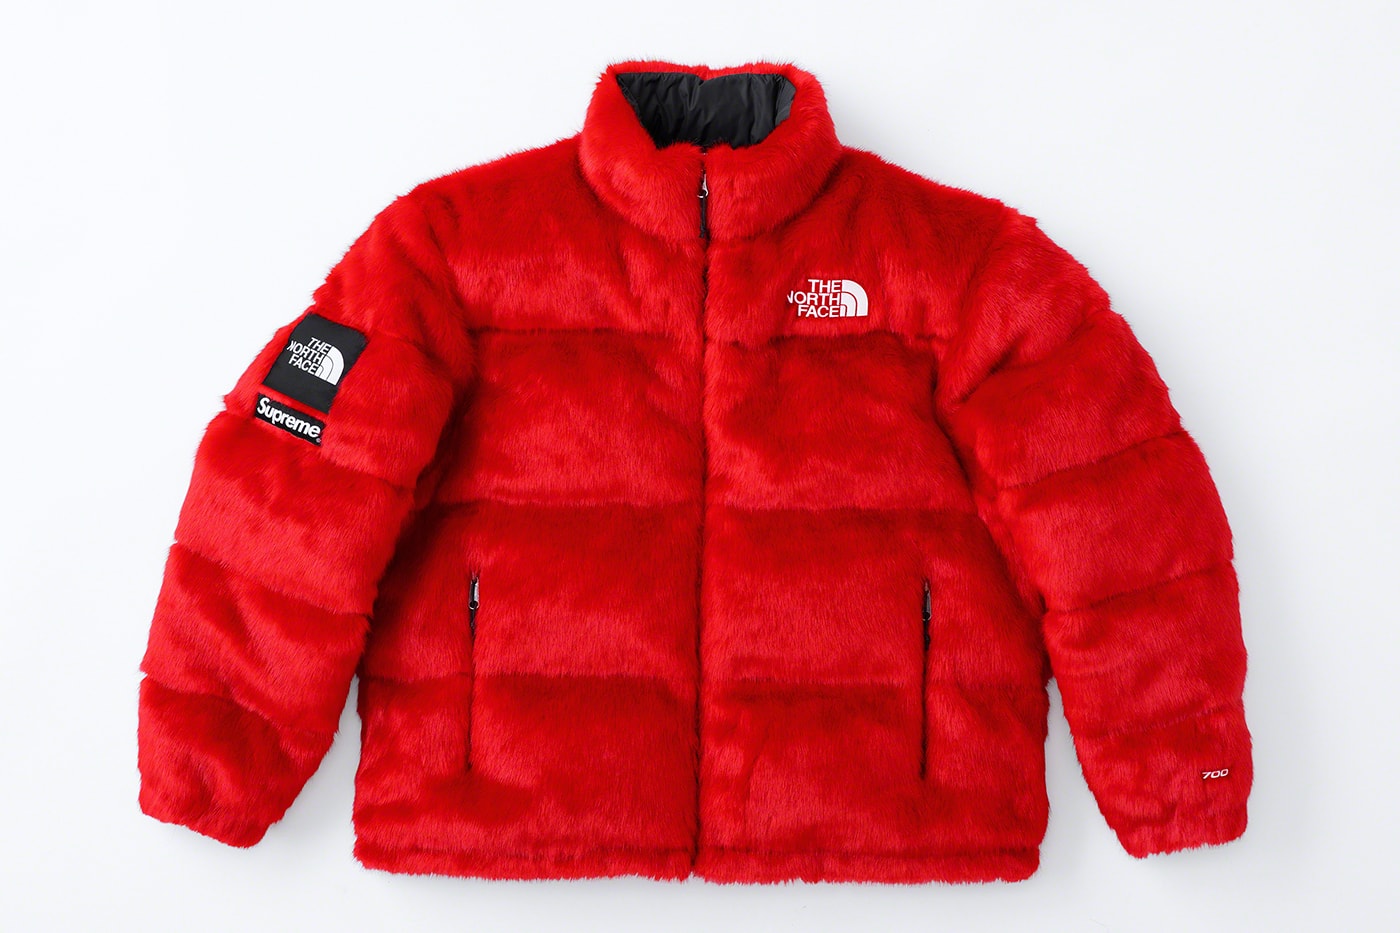 Supreme x The North Face return with Fall 2020 collection